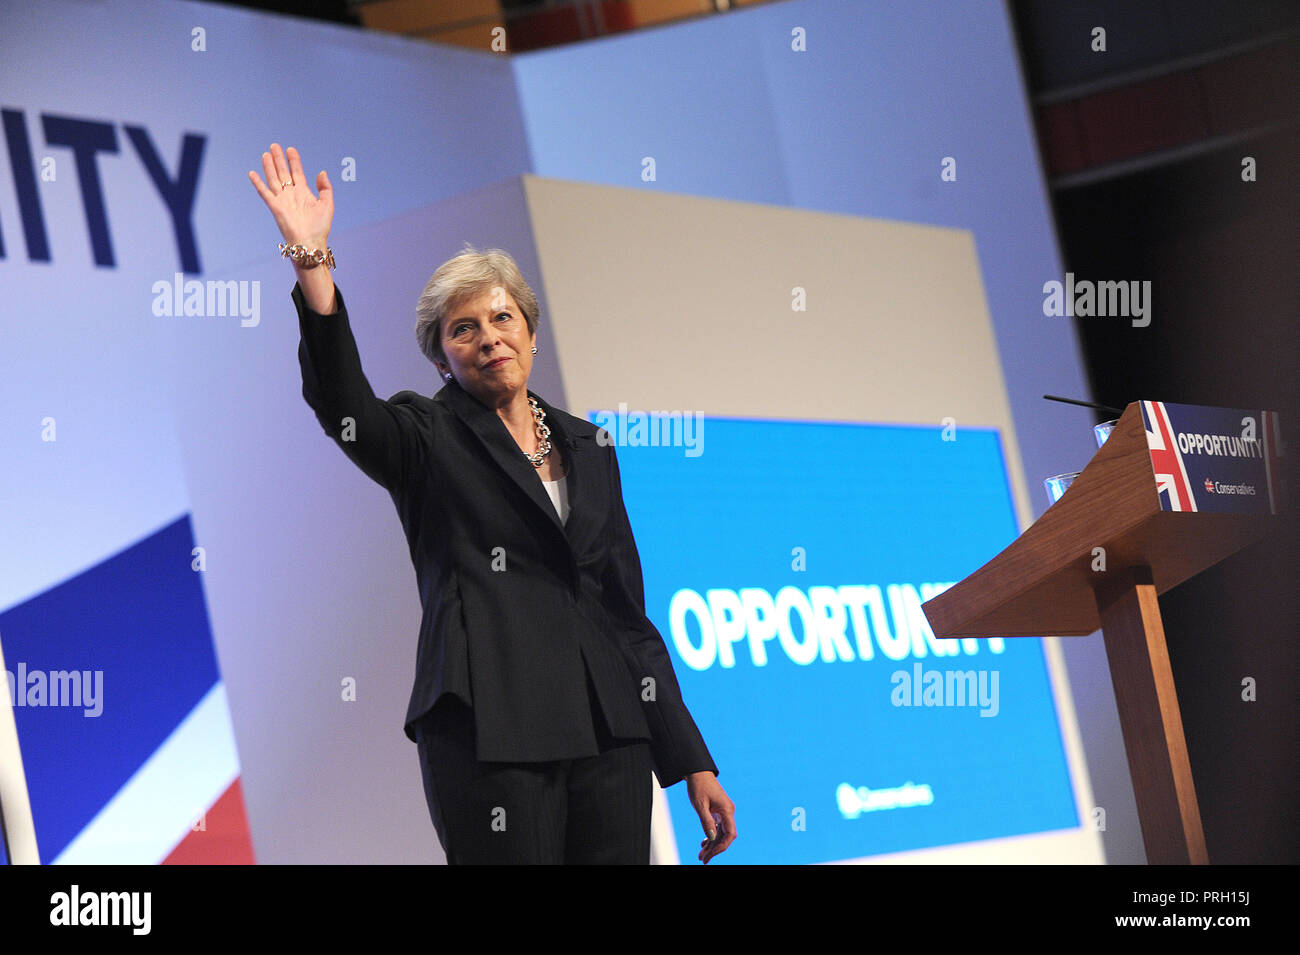 Birmingham, England. 3rd October, 2018.  Theresa May MP, Prime Minister and Leader of the Conservative Party, waves to the audience following her keynote speech to conference on the closing session of the fourth day of the Conservative Party annual conference at the ICC.  Kevin Hayes/Alamy Live News Credit: Kevin Hayes/Alamy Live News Stock Photo